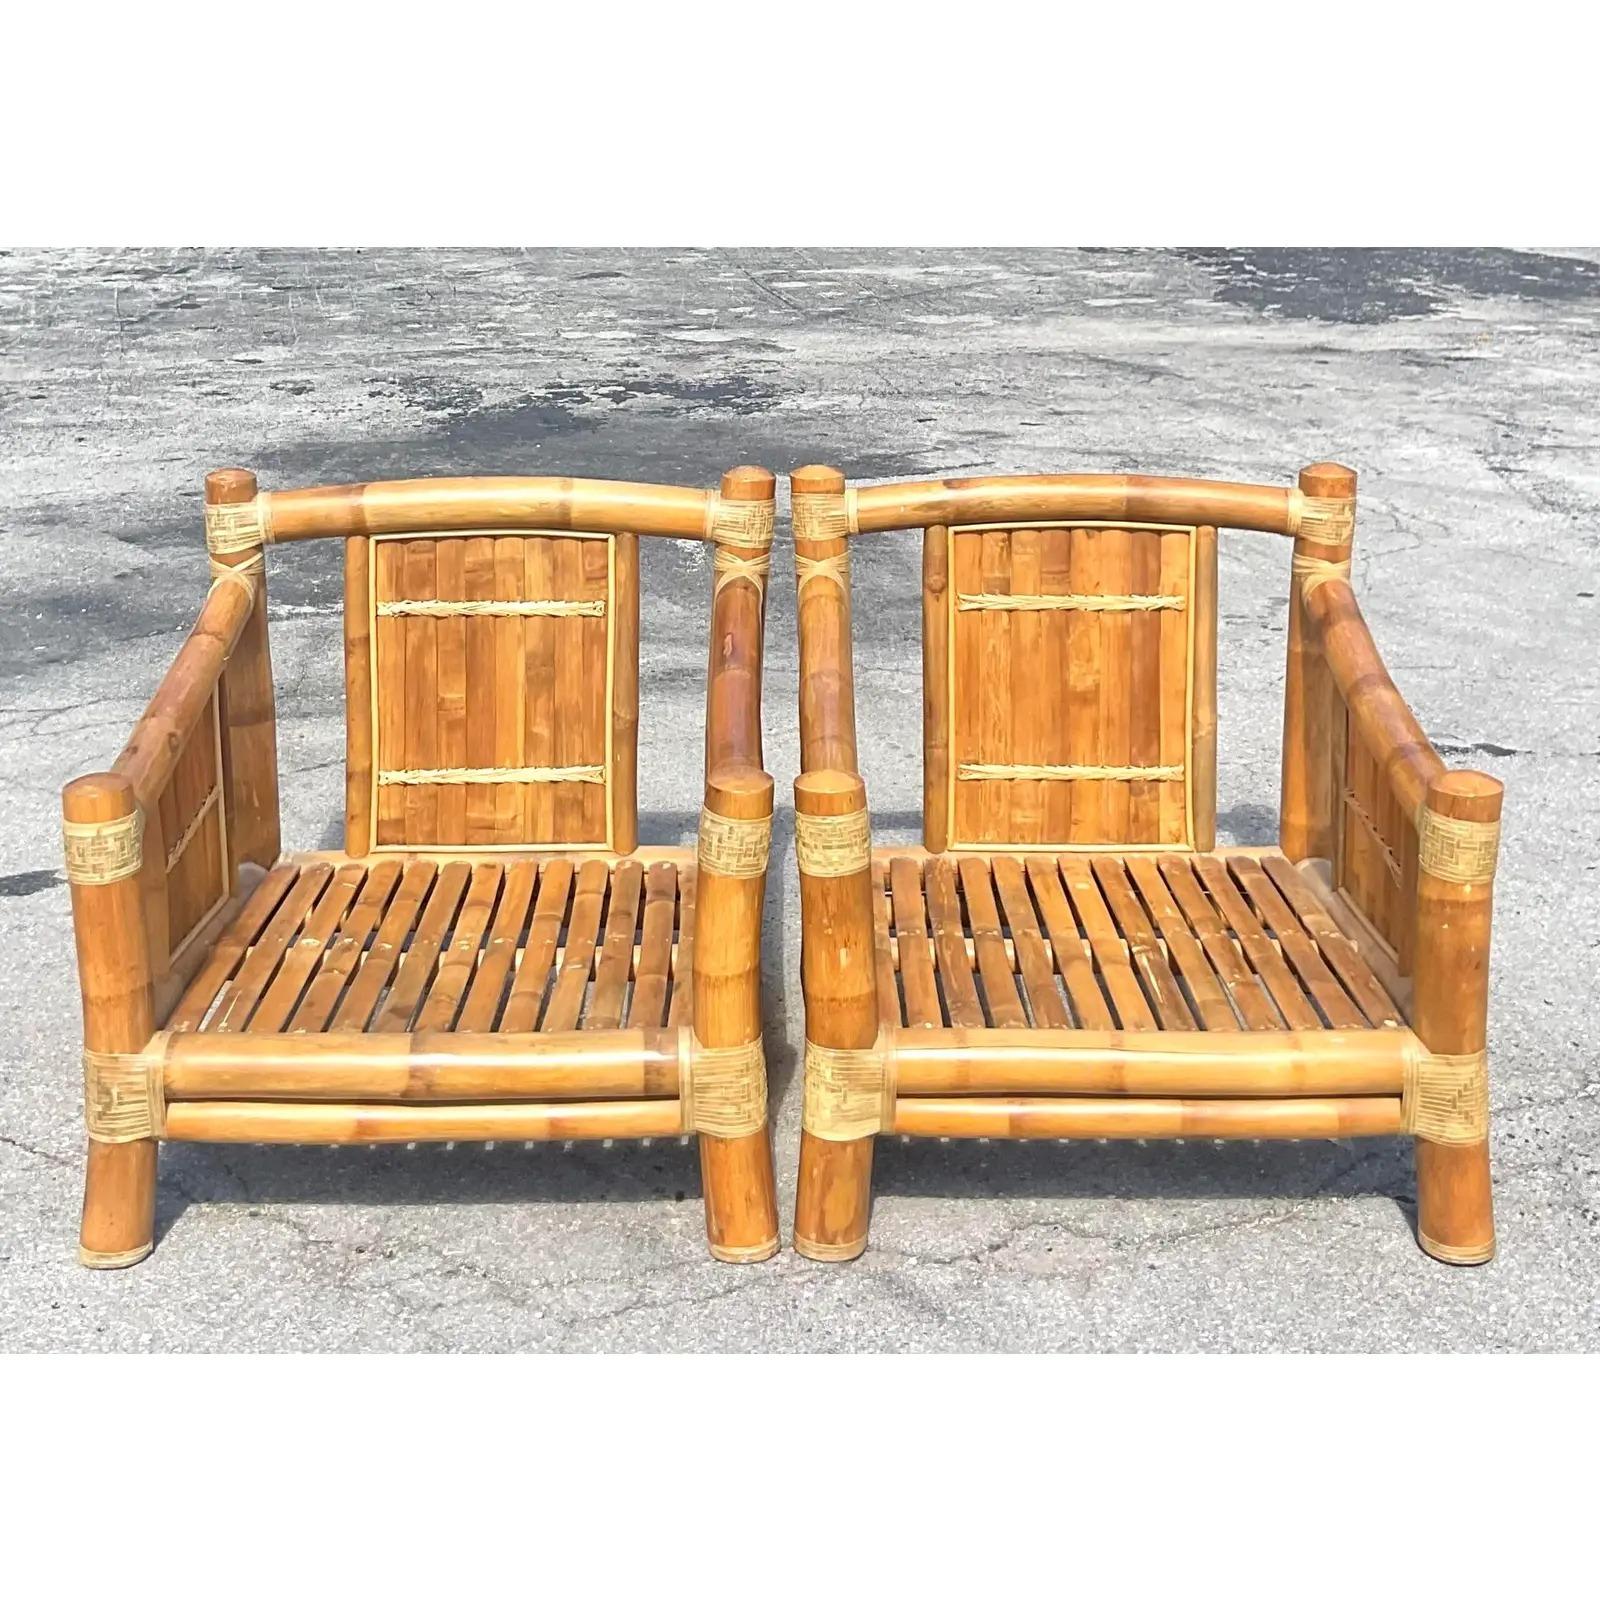 Fantastic pair of vintage Coastal elephant bamboo lounge chairs. Thick bamboo creates this wide and comfortable frame. Chic palm print upholstery in great shape. Acquired from a Palm Beach estate.